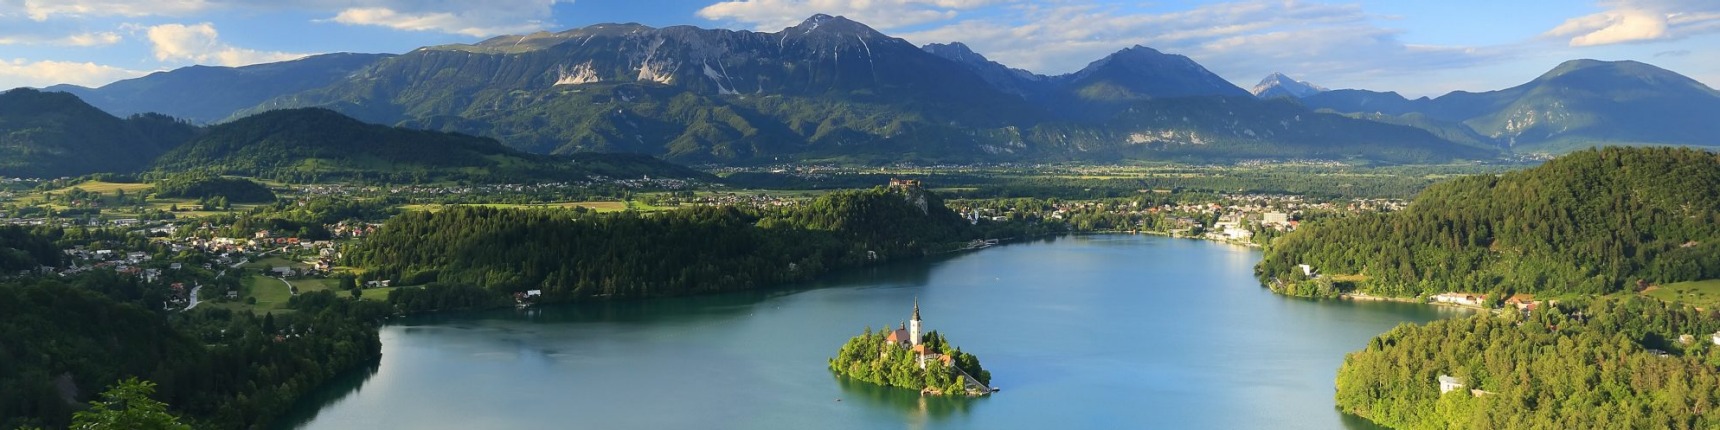 Bled Lake in Slovenia with the Assumption of Mary Church, Slovenia, Europe